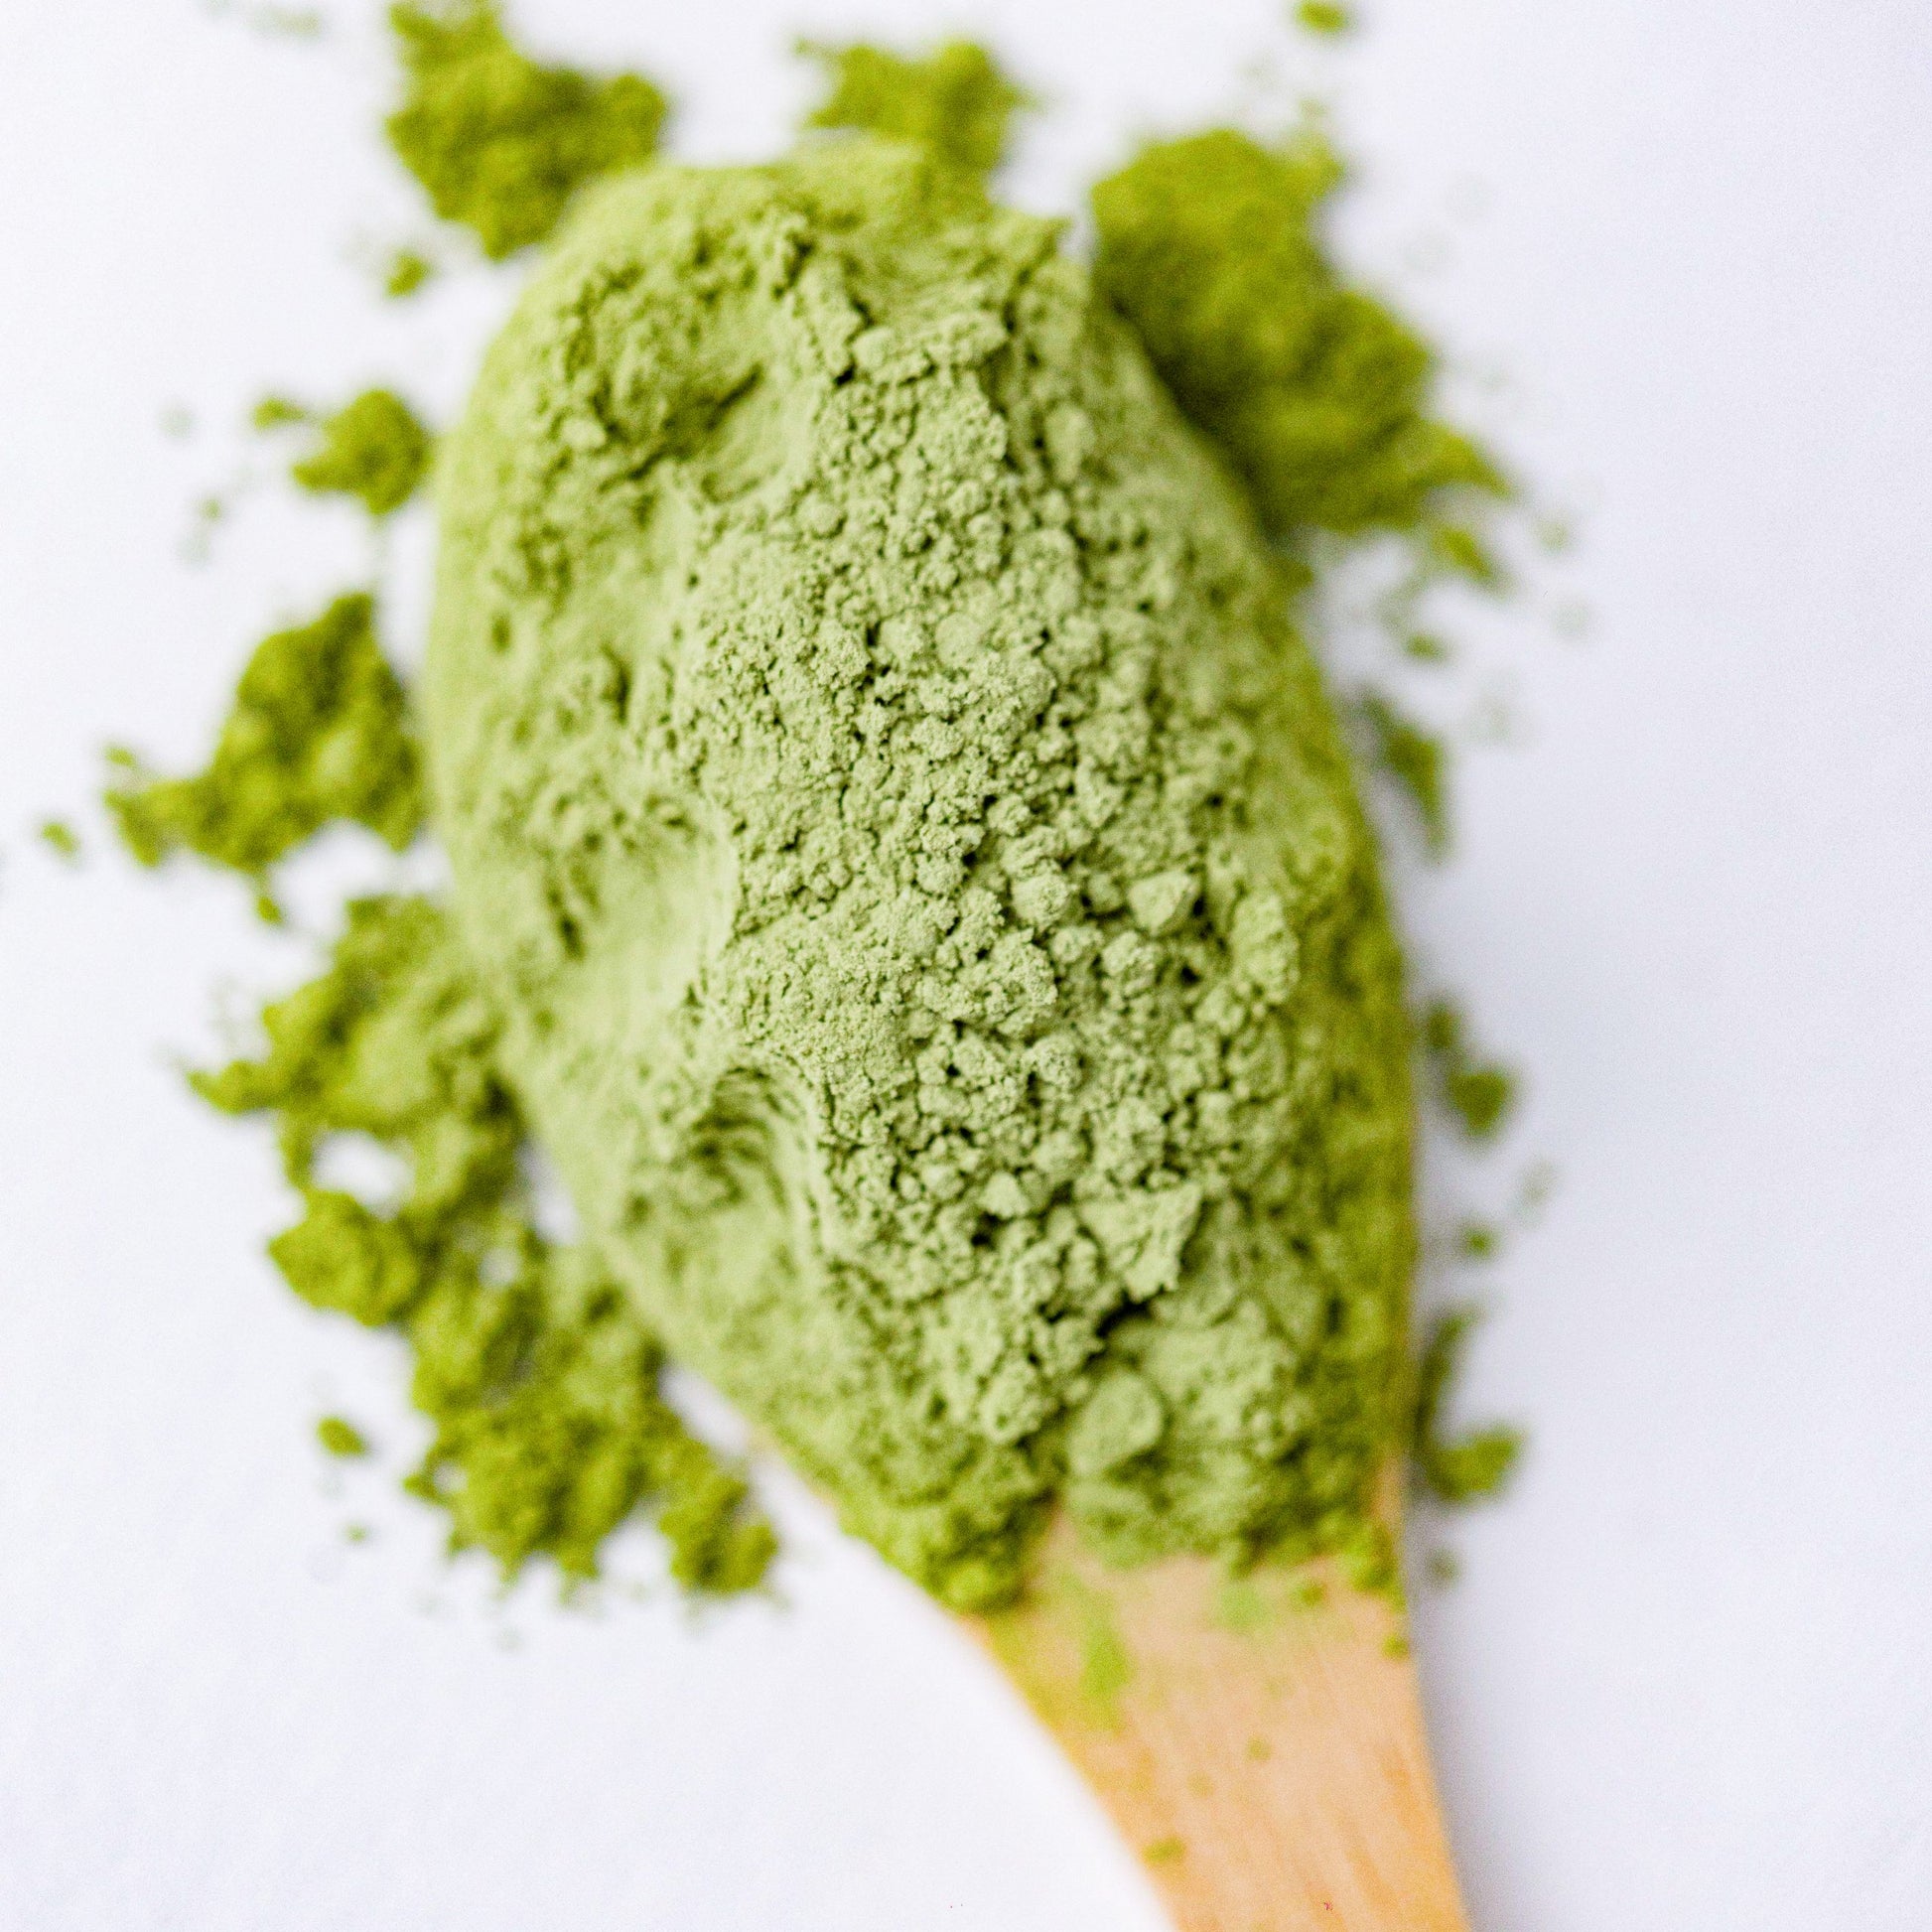 Compra Online Matcha Ceremonial- Pomo 30 g - YÖY Superfoods